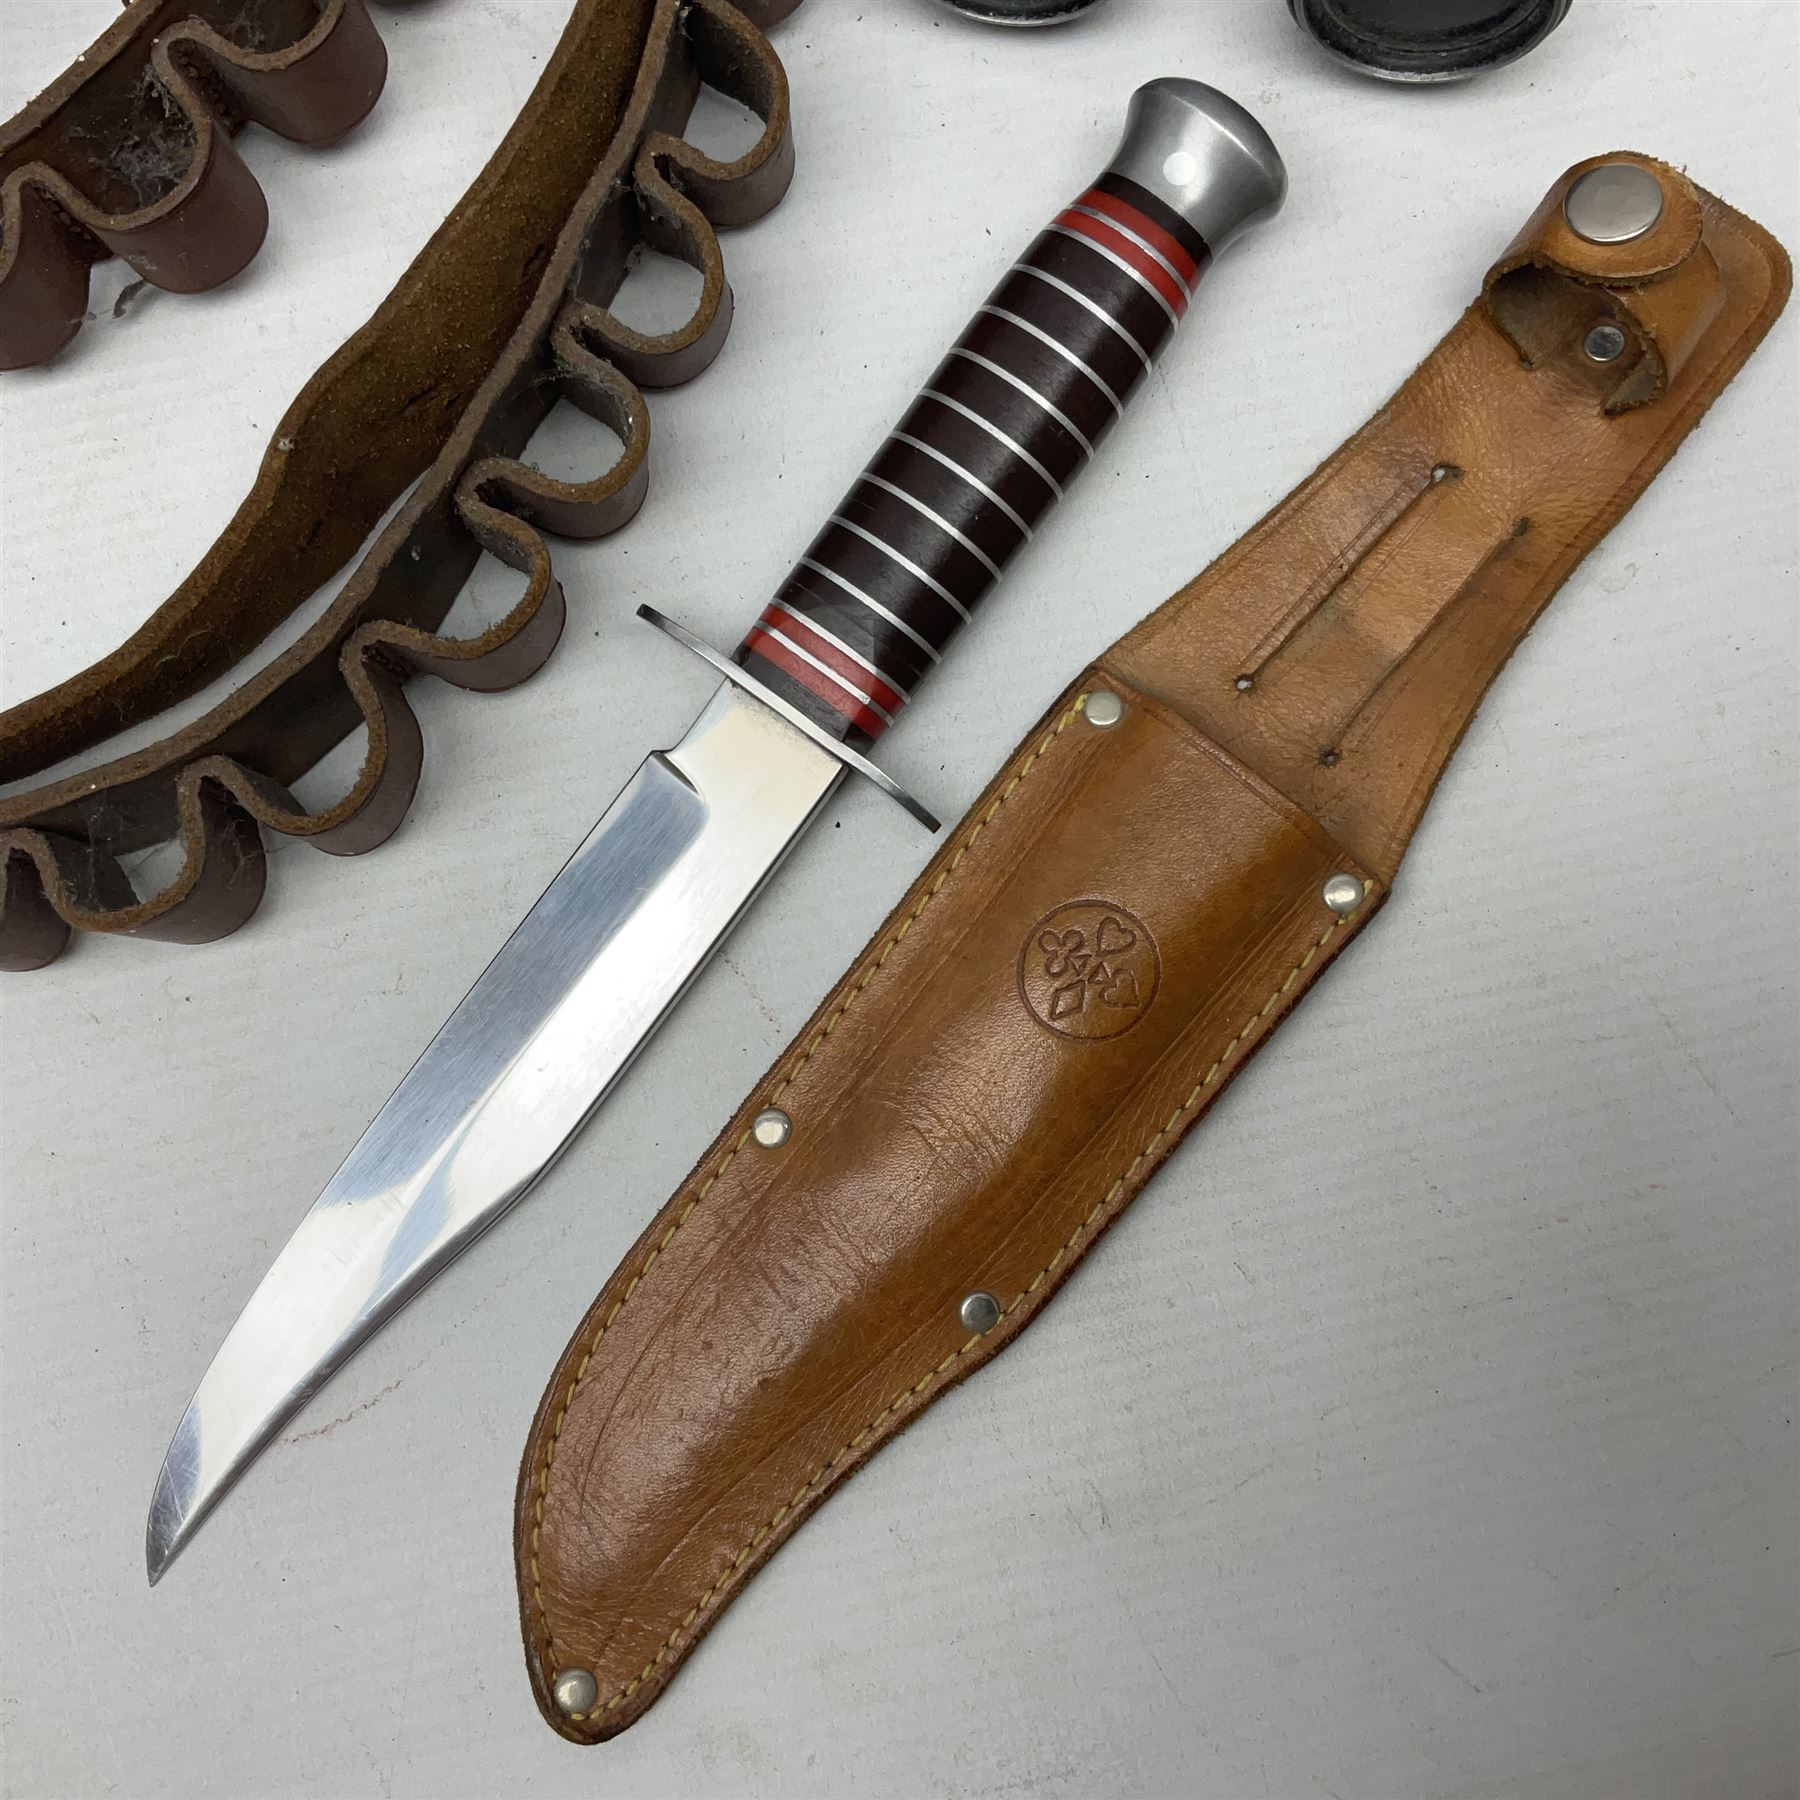 Mundial Brazil bowie knife - Image 2 of 21